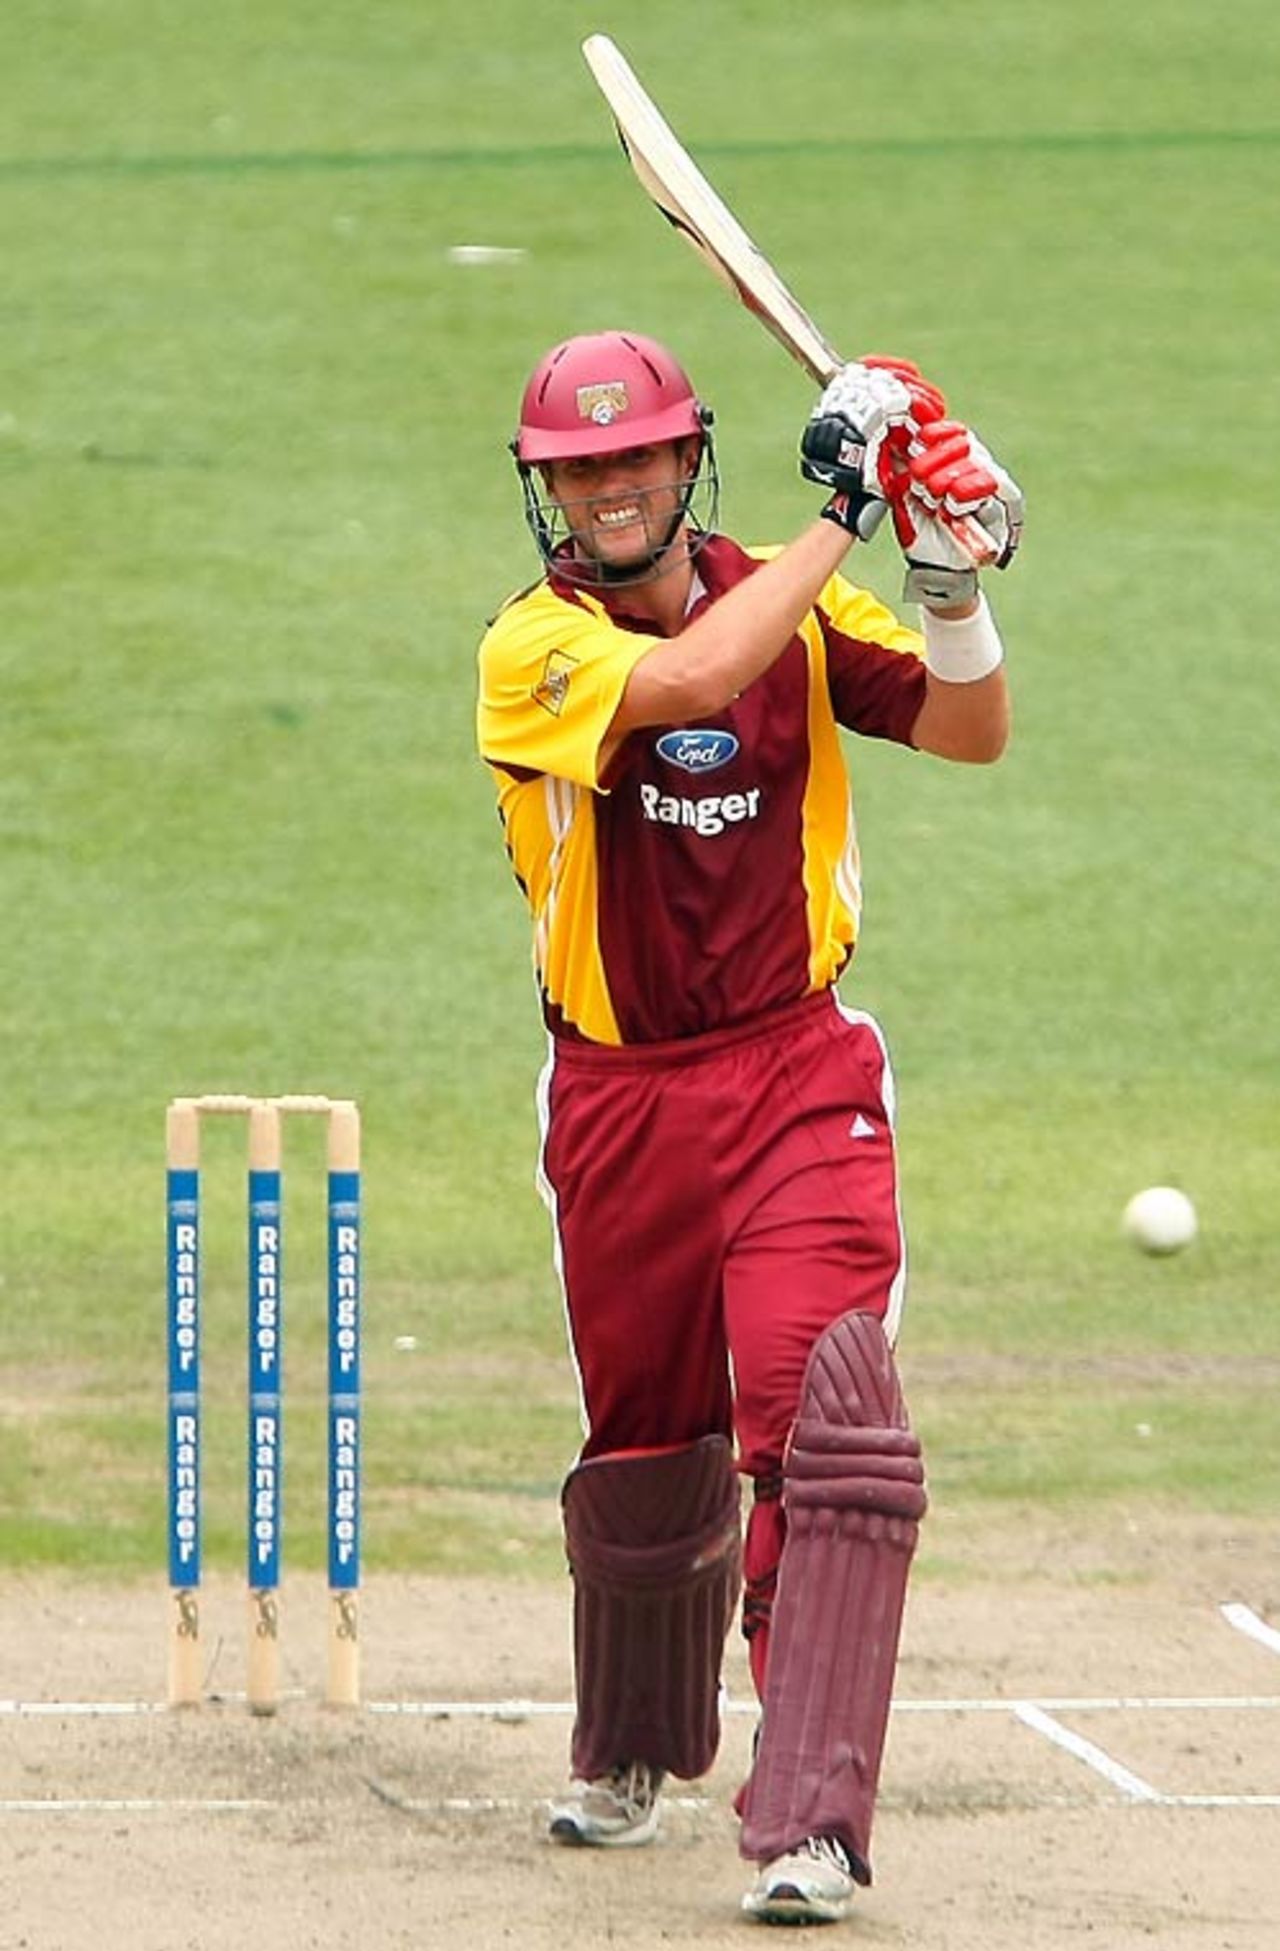 Chris Simpson top scored for the Bulls with 42, Victoria v Queensland, FR Cup, MCG, February 6, 2008